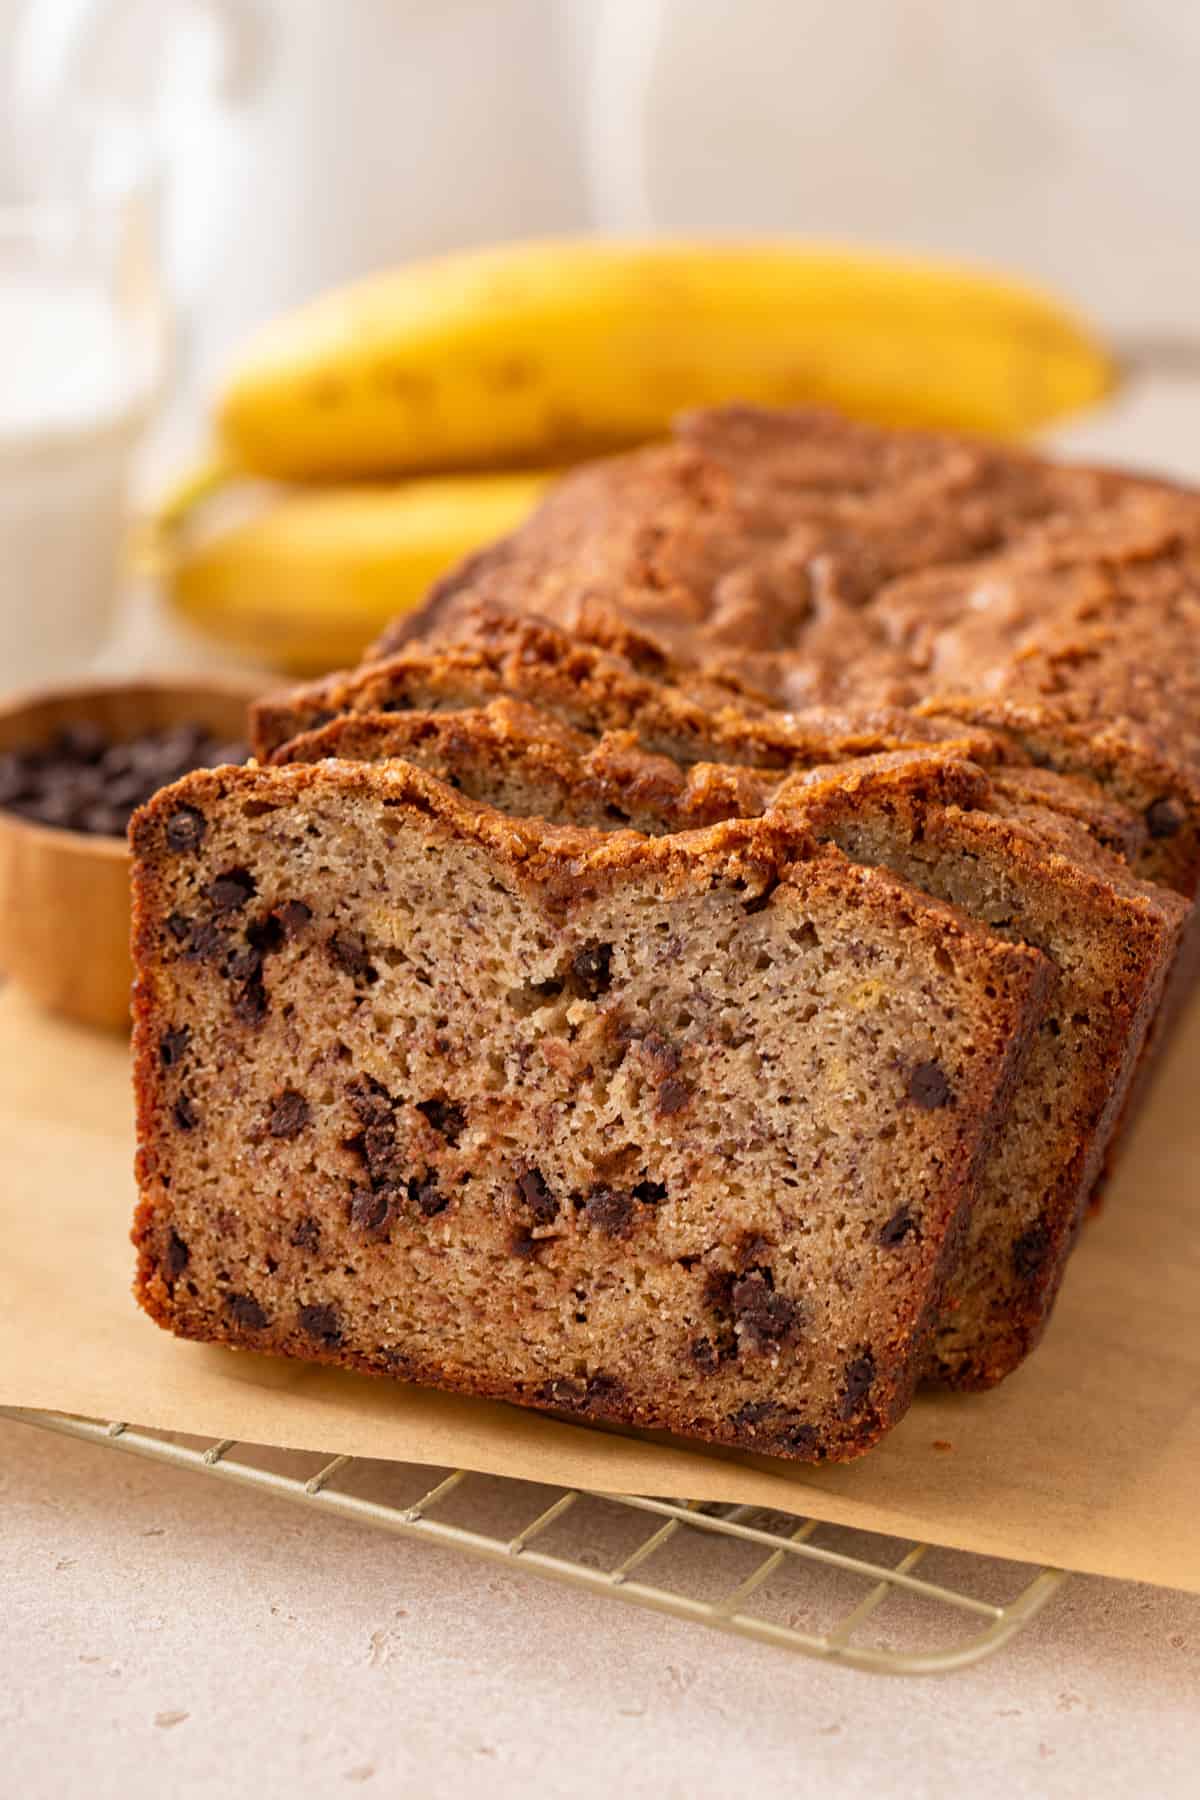 Slices of chocolate chip banana bread leaning against the loaf of bread.